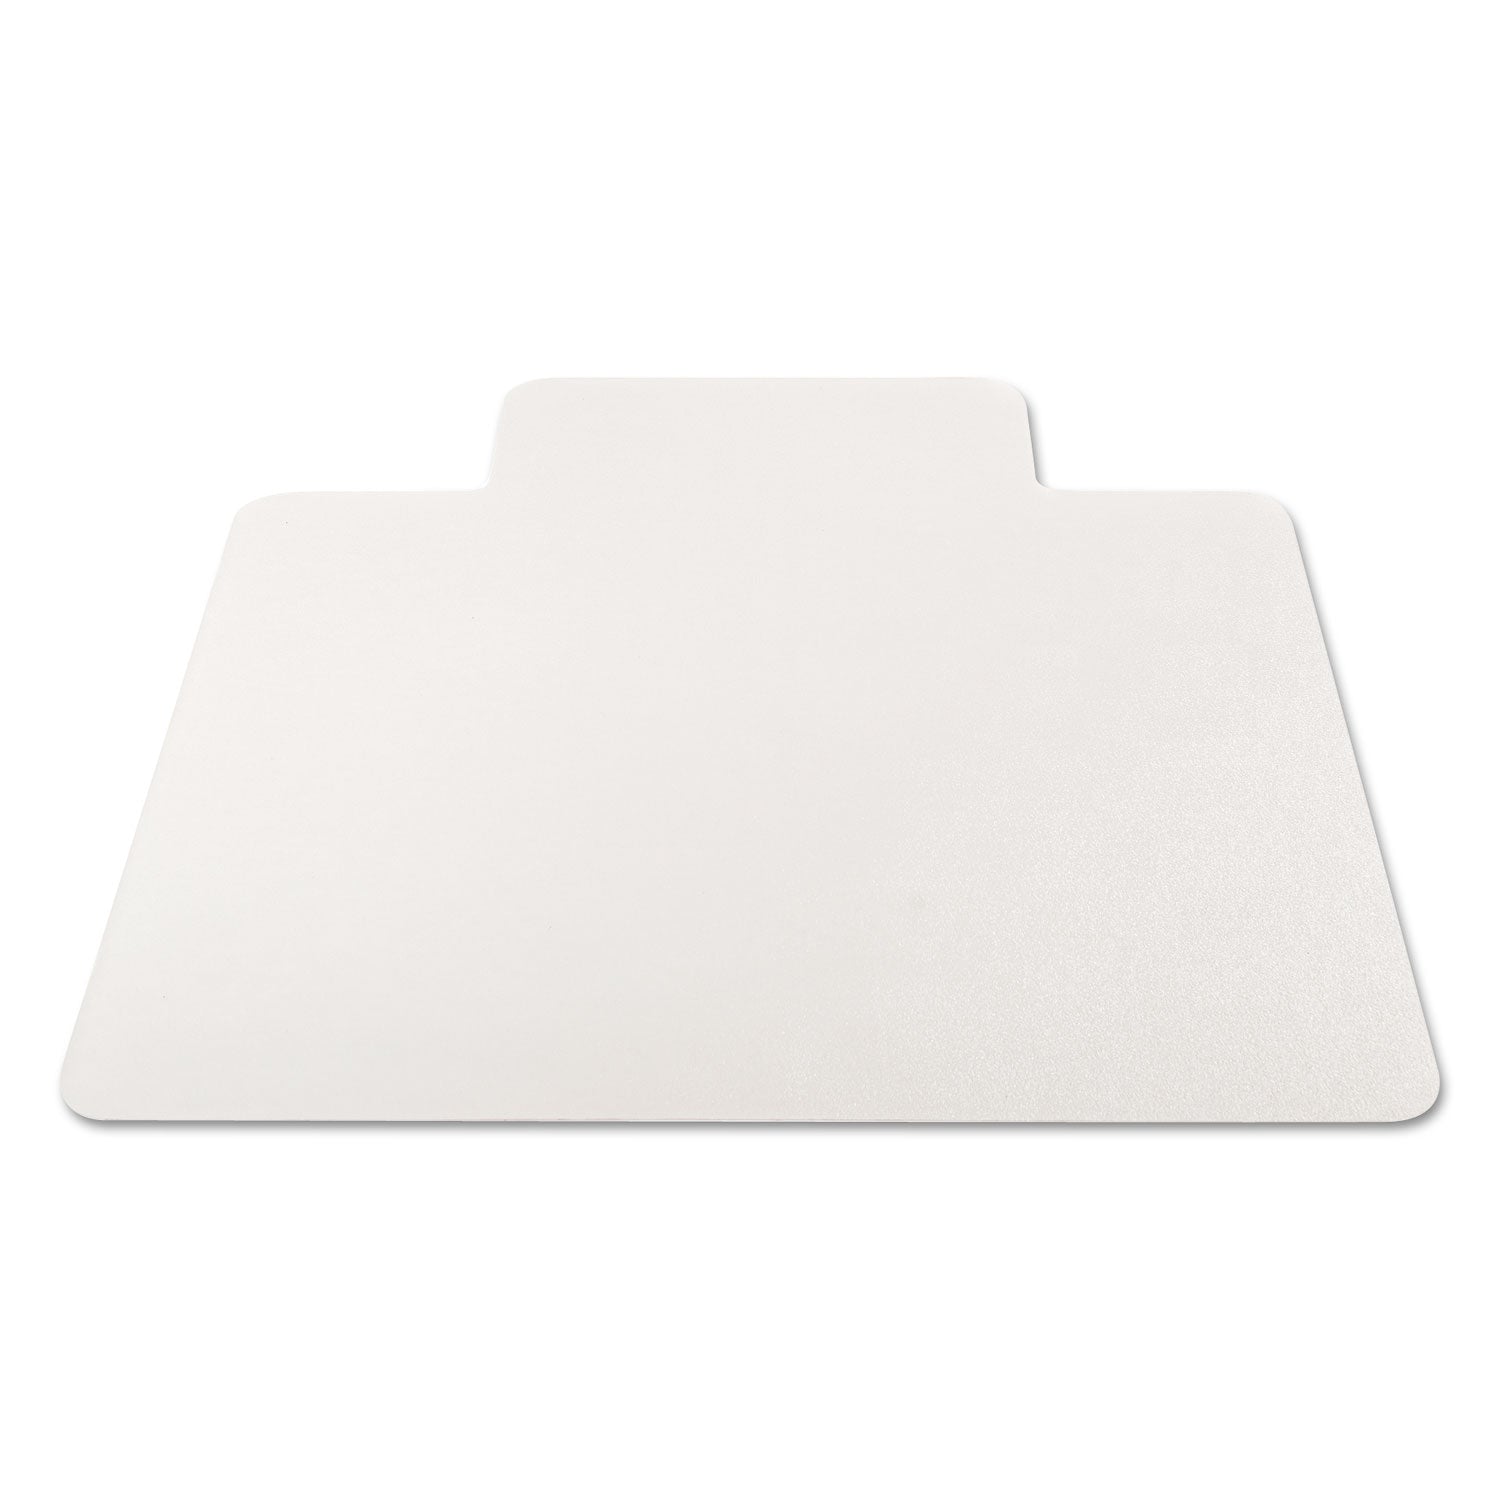 all-day-use-non-studded-chair-mat-for-hard-floors-45-x-53-wide-lipped-clear_alemat4553hfl - 8